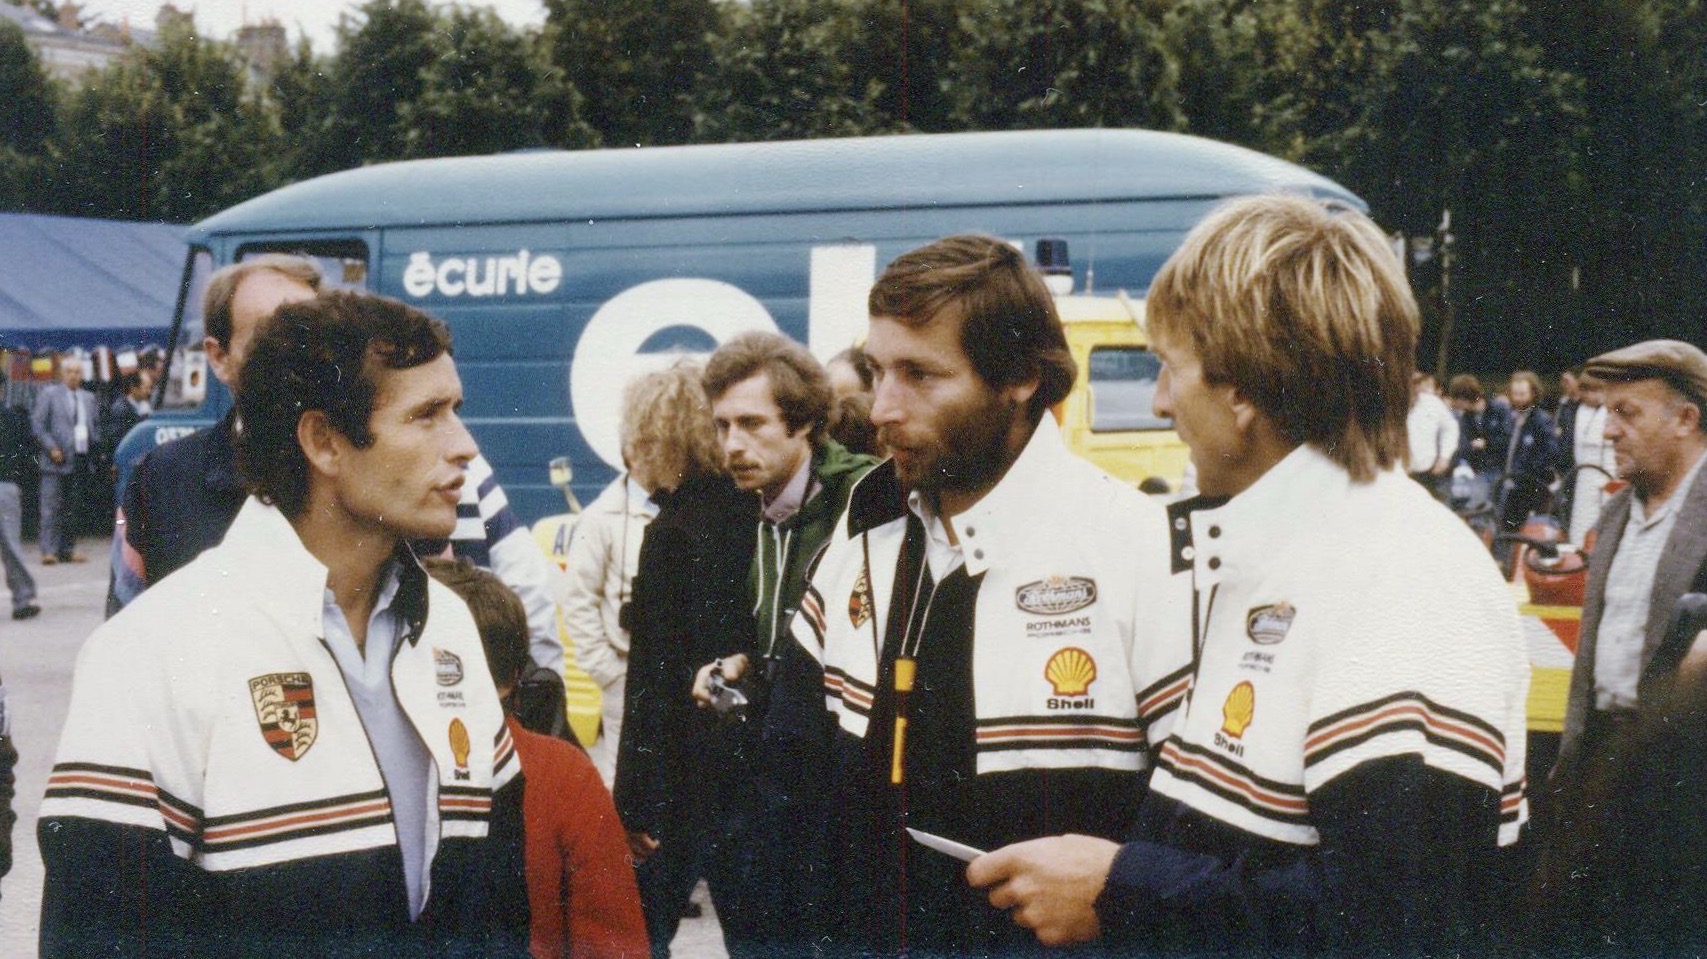 Derek Bell and Jacky Ickx at Le Mans 1982